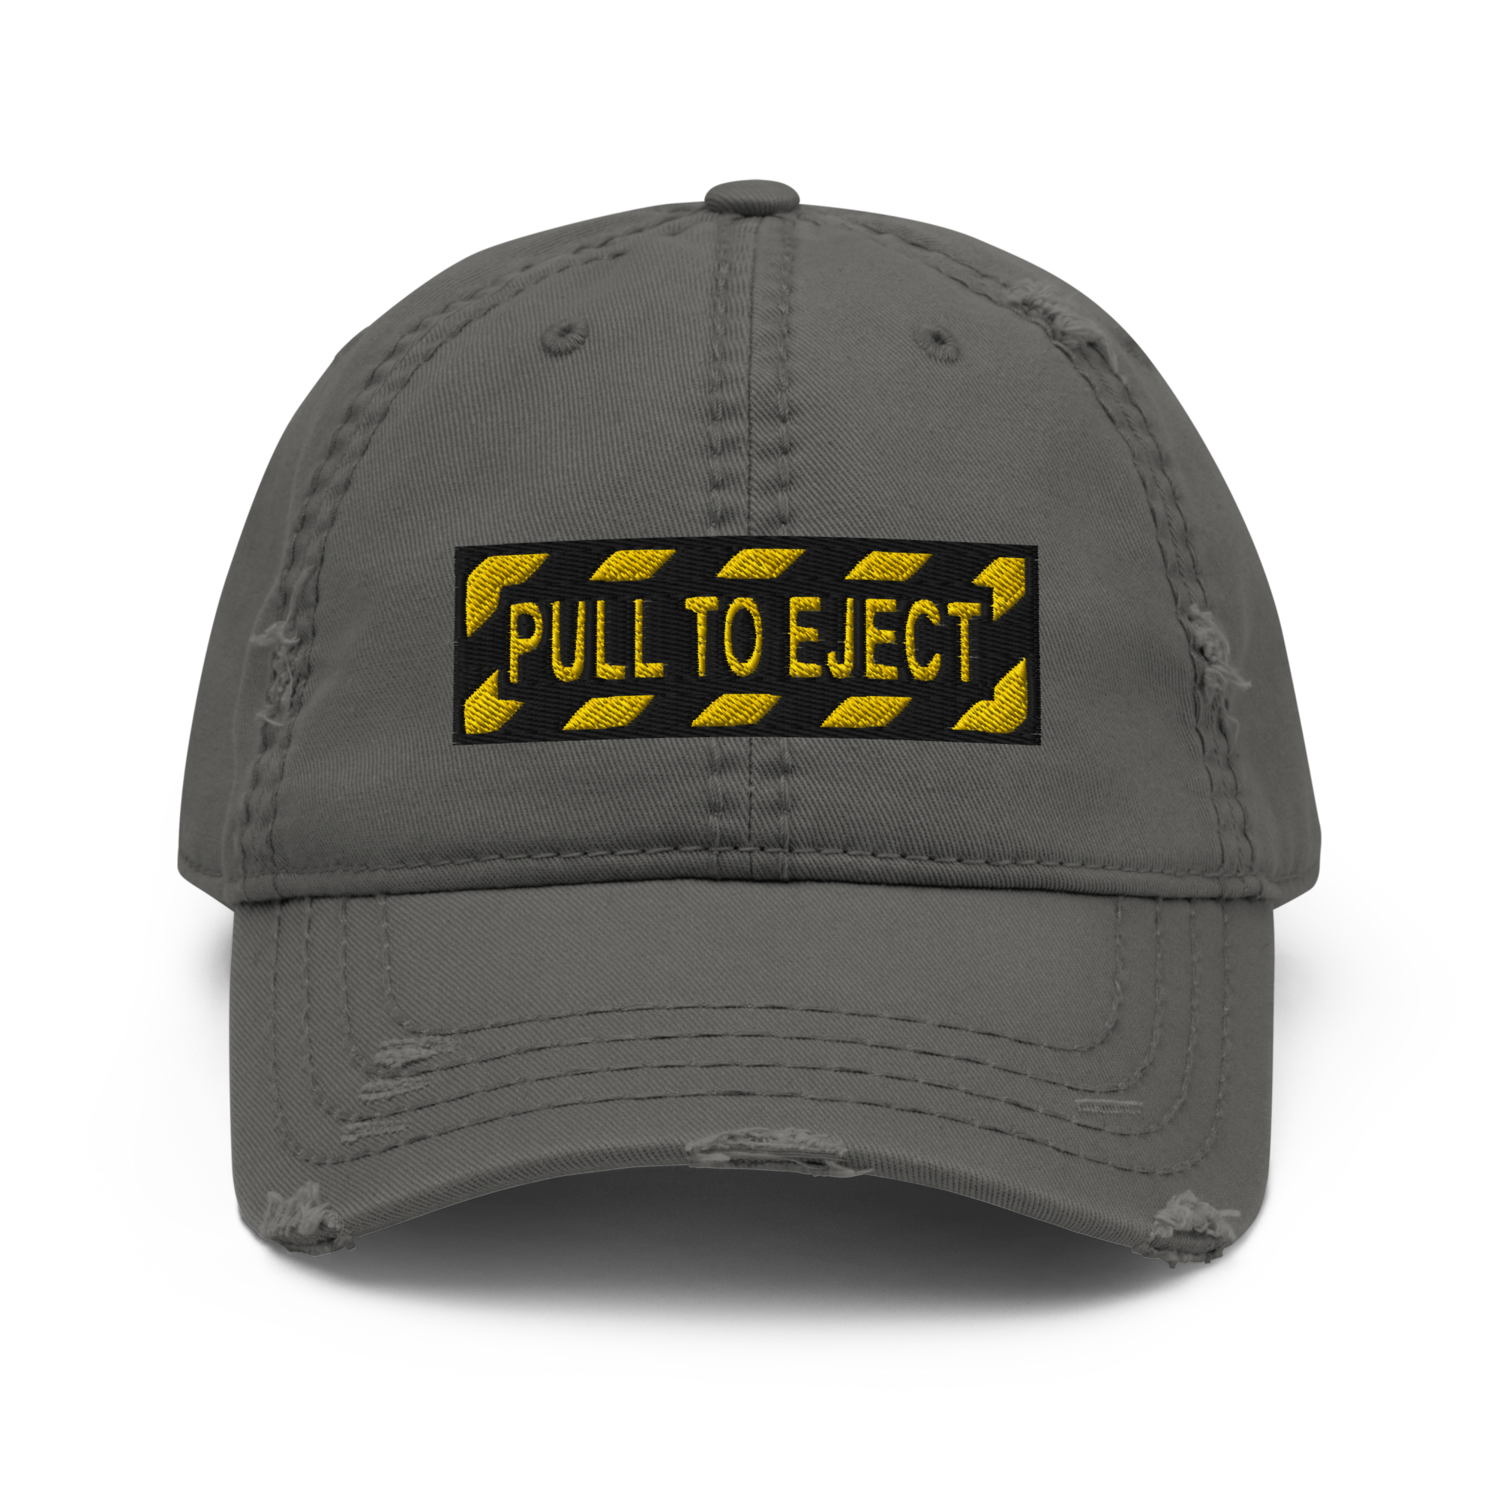 Pull To Eject Distressed Cap